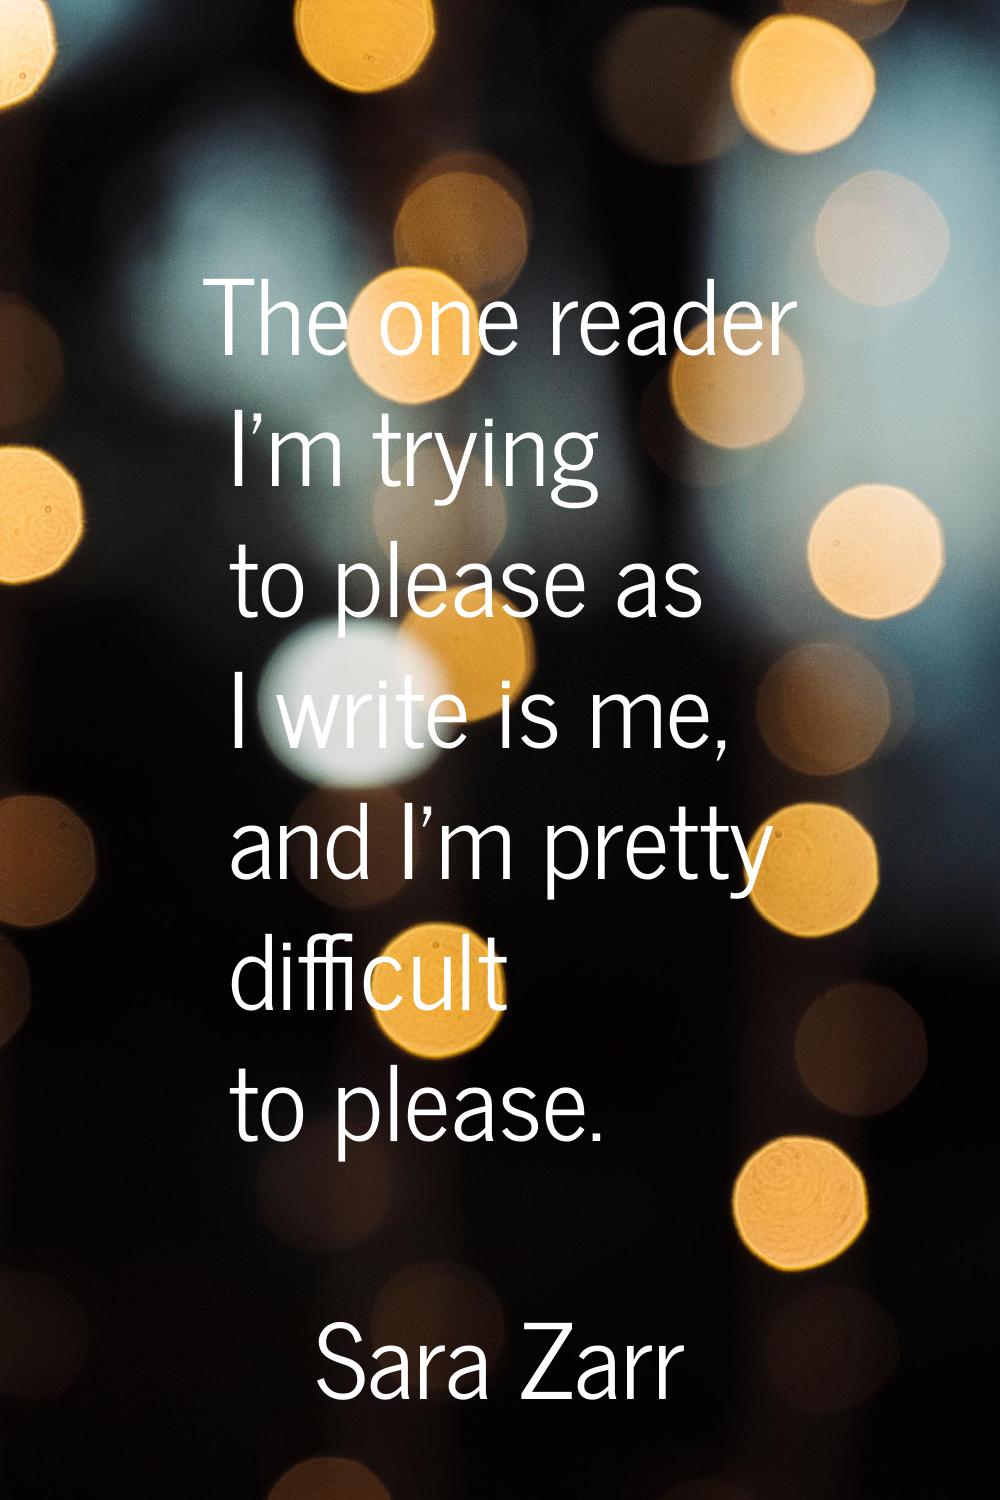 The one reader I'm trying to please as I write is me, and I'm pretty difficult to please.